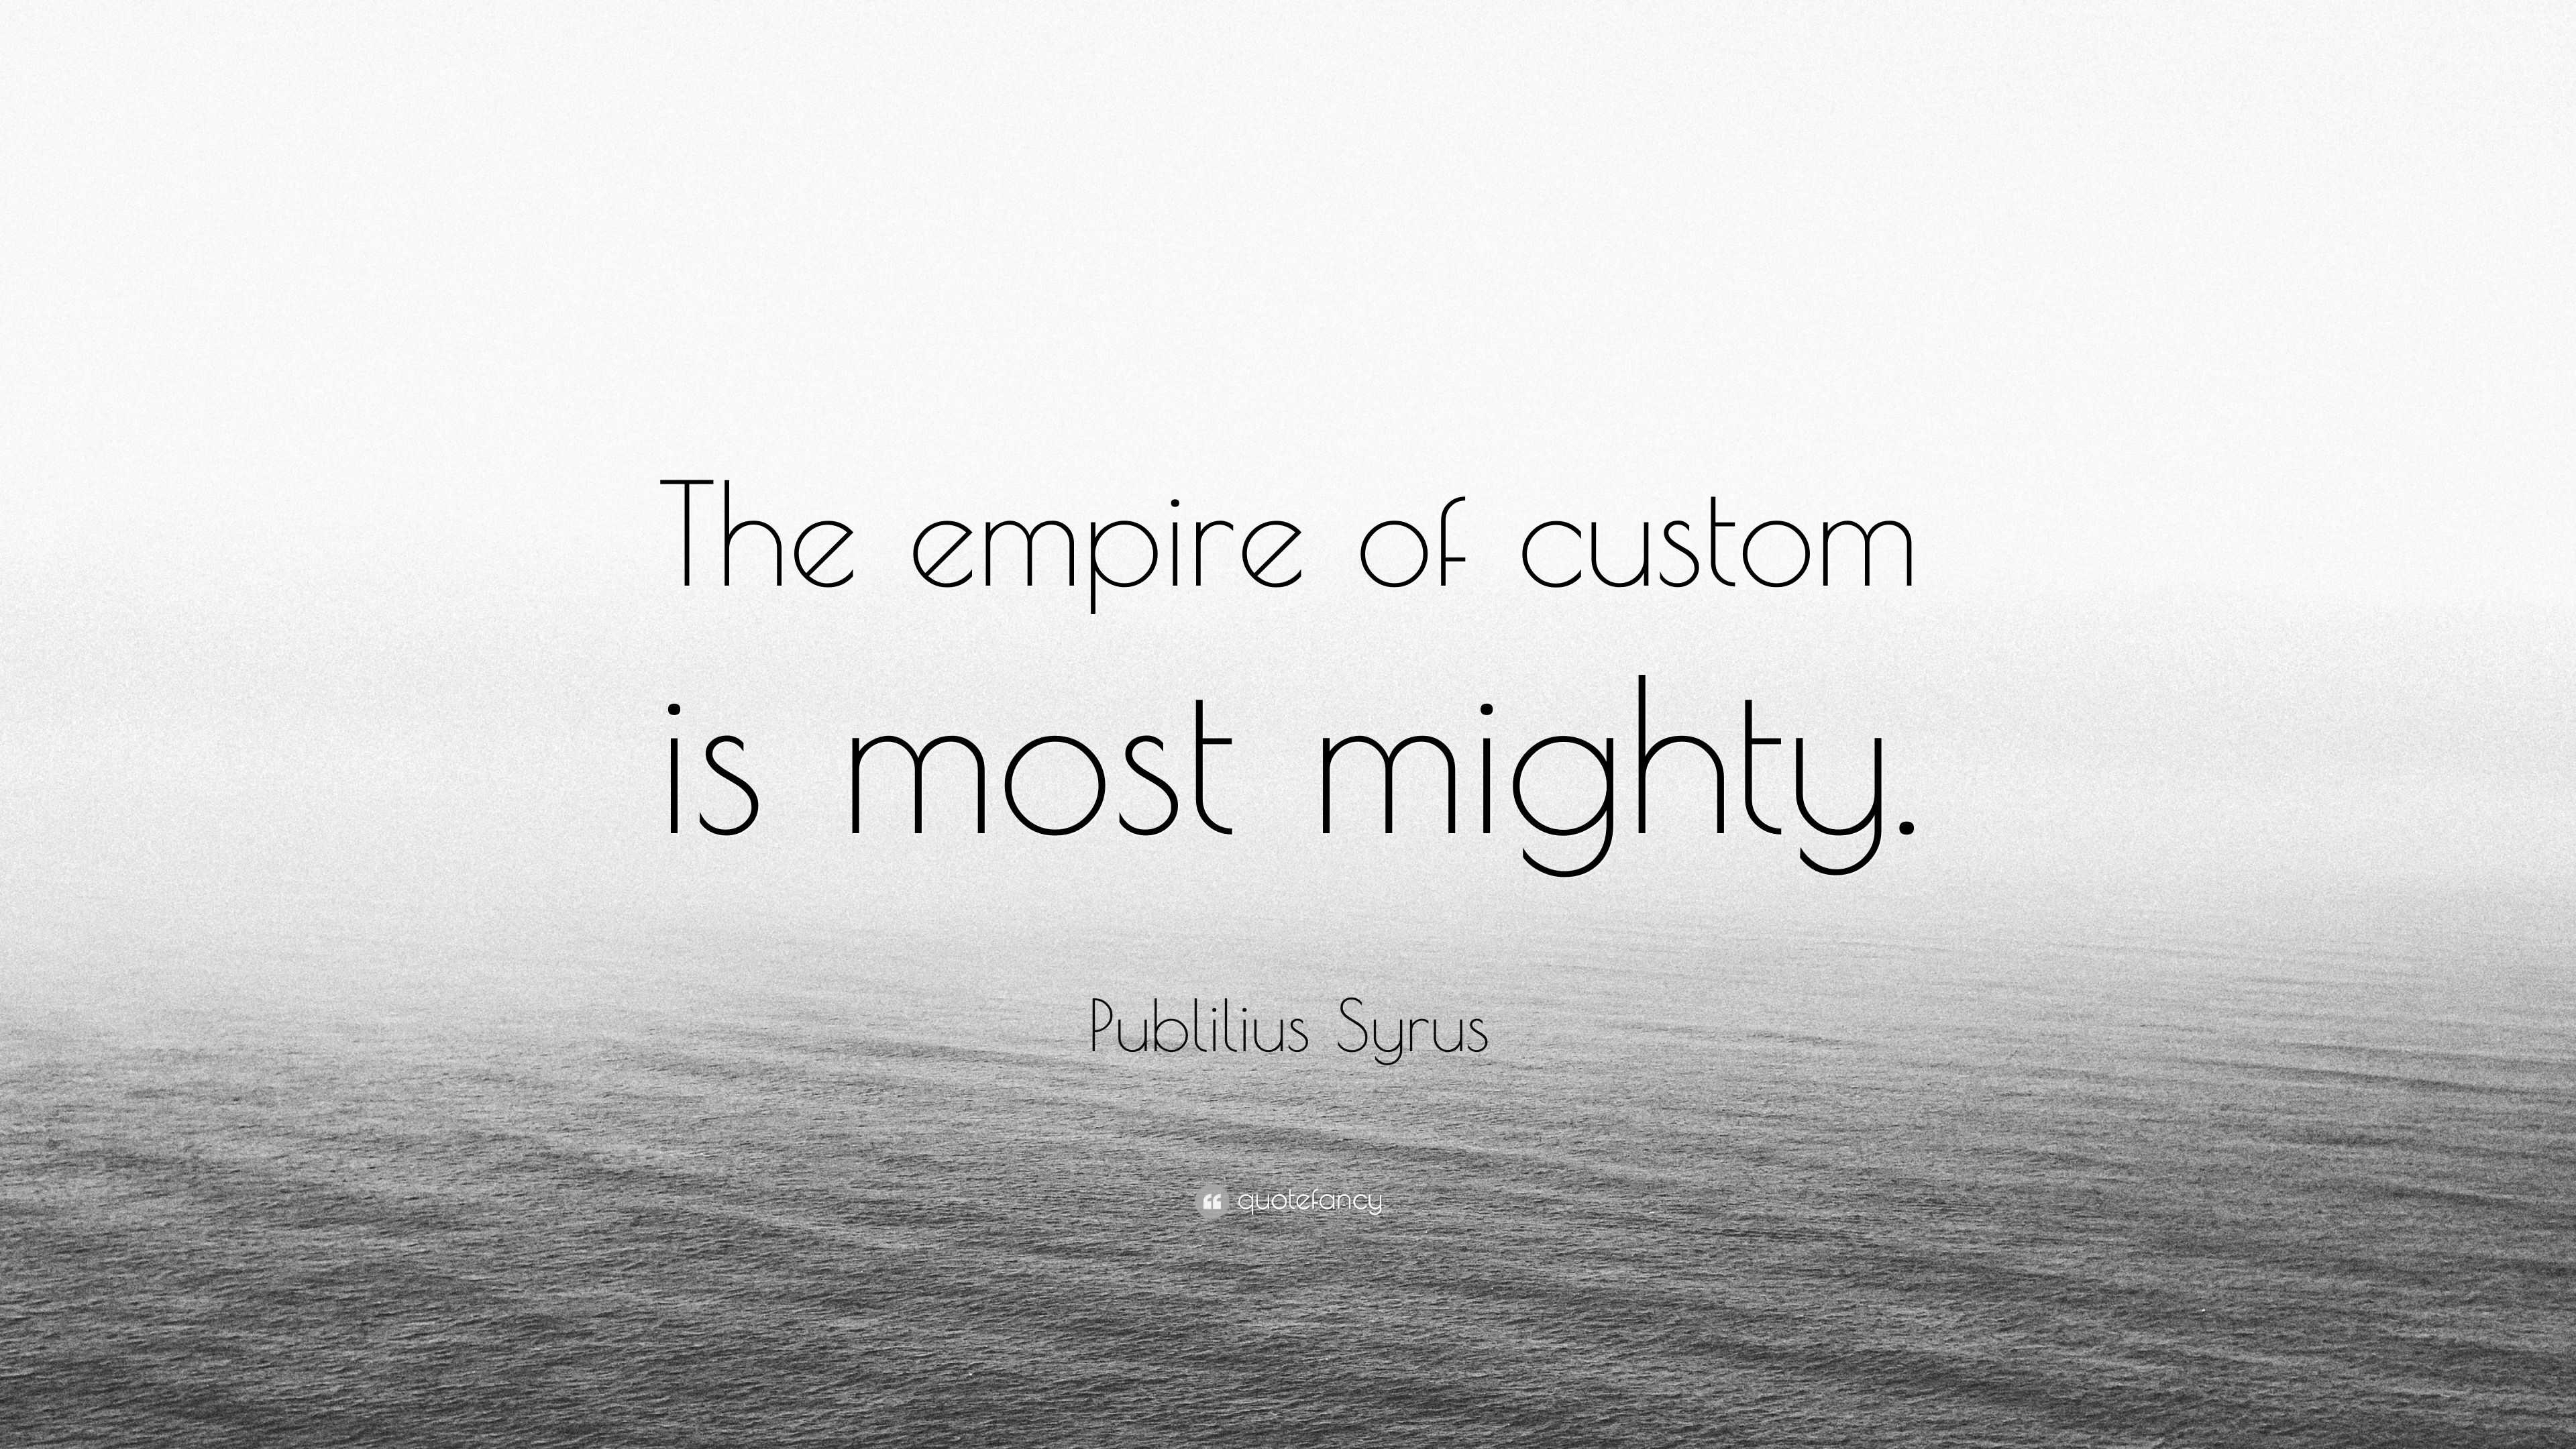 Publilius Syrus Quote: “The empire of custom is most mighty.”